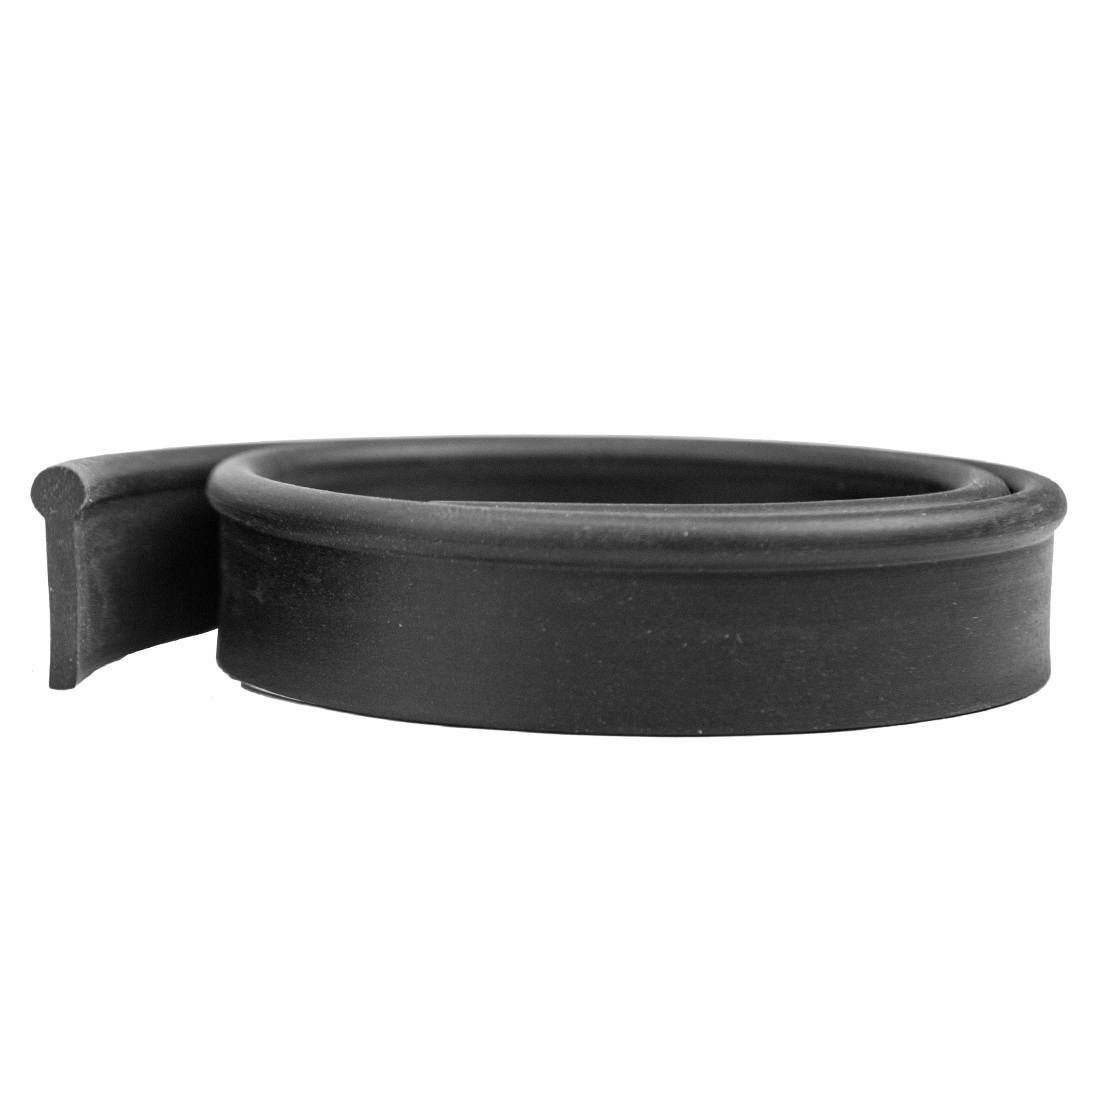 Pulex Hard Squeegee Rubber Front View